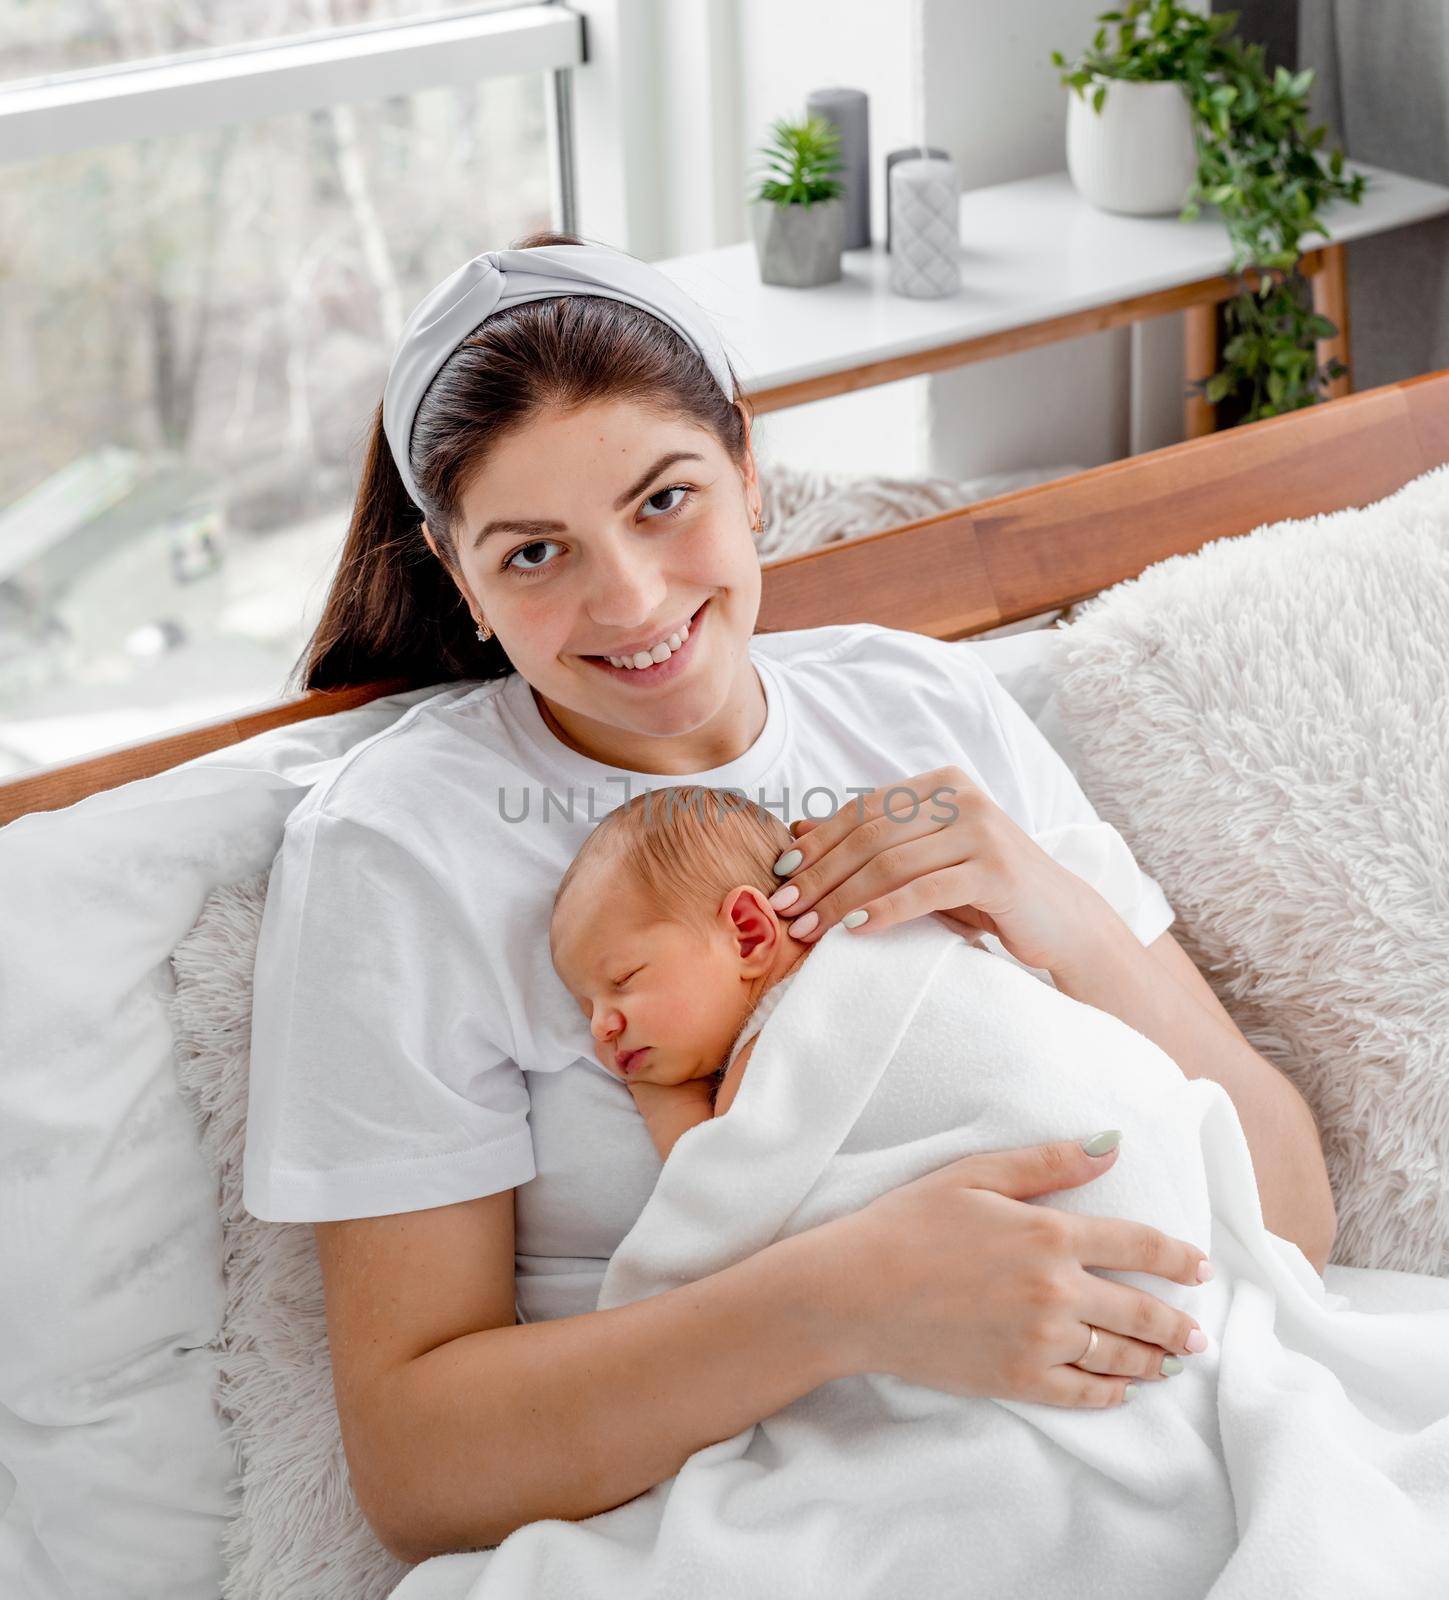 Young mother with napping newborn baby staying in the bed and smiling. Portrait of beautiful girl with her child. Mom holding sleeping infant child on her chest